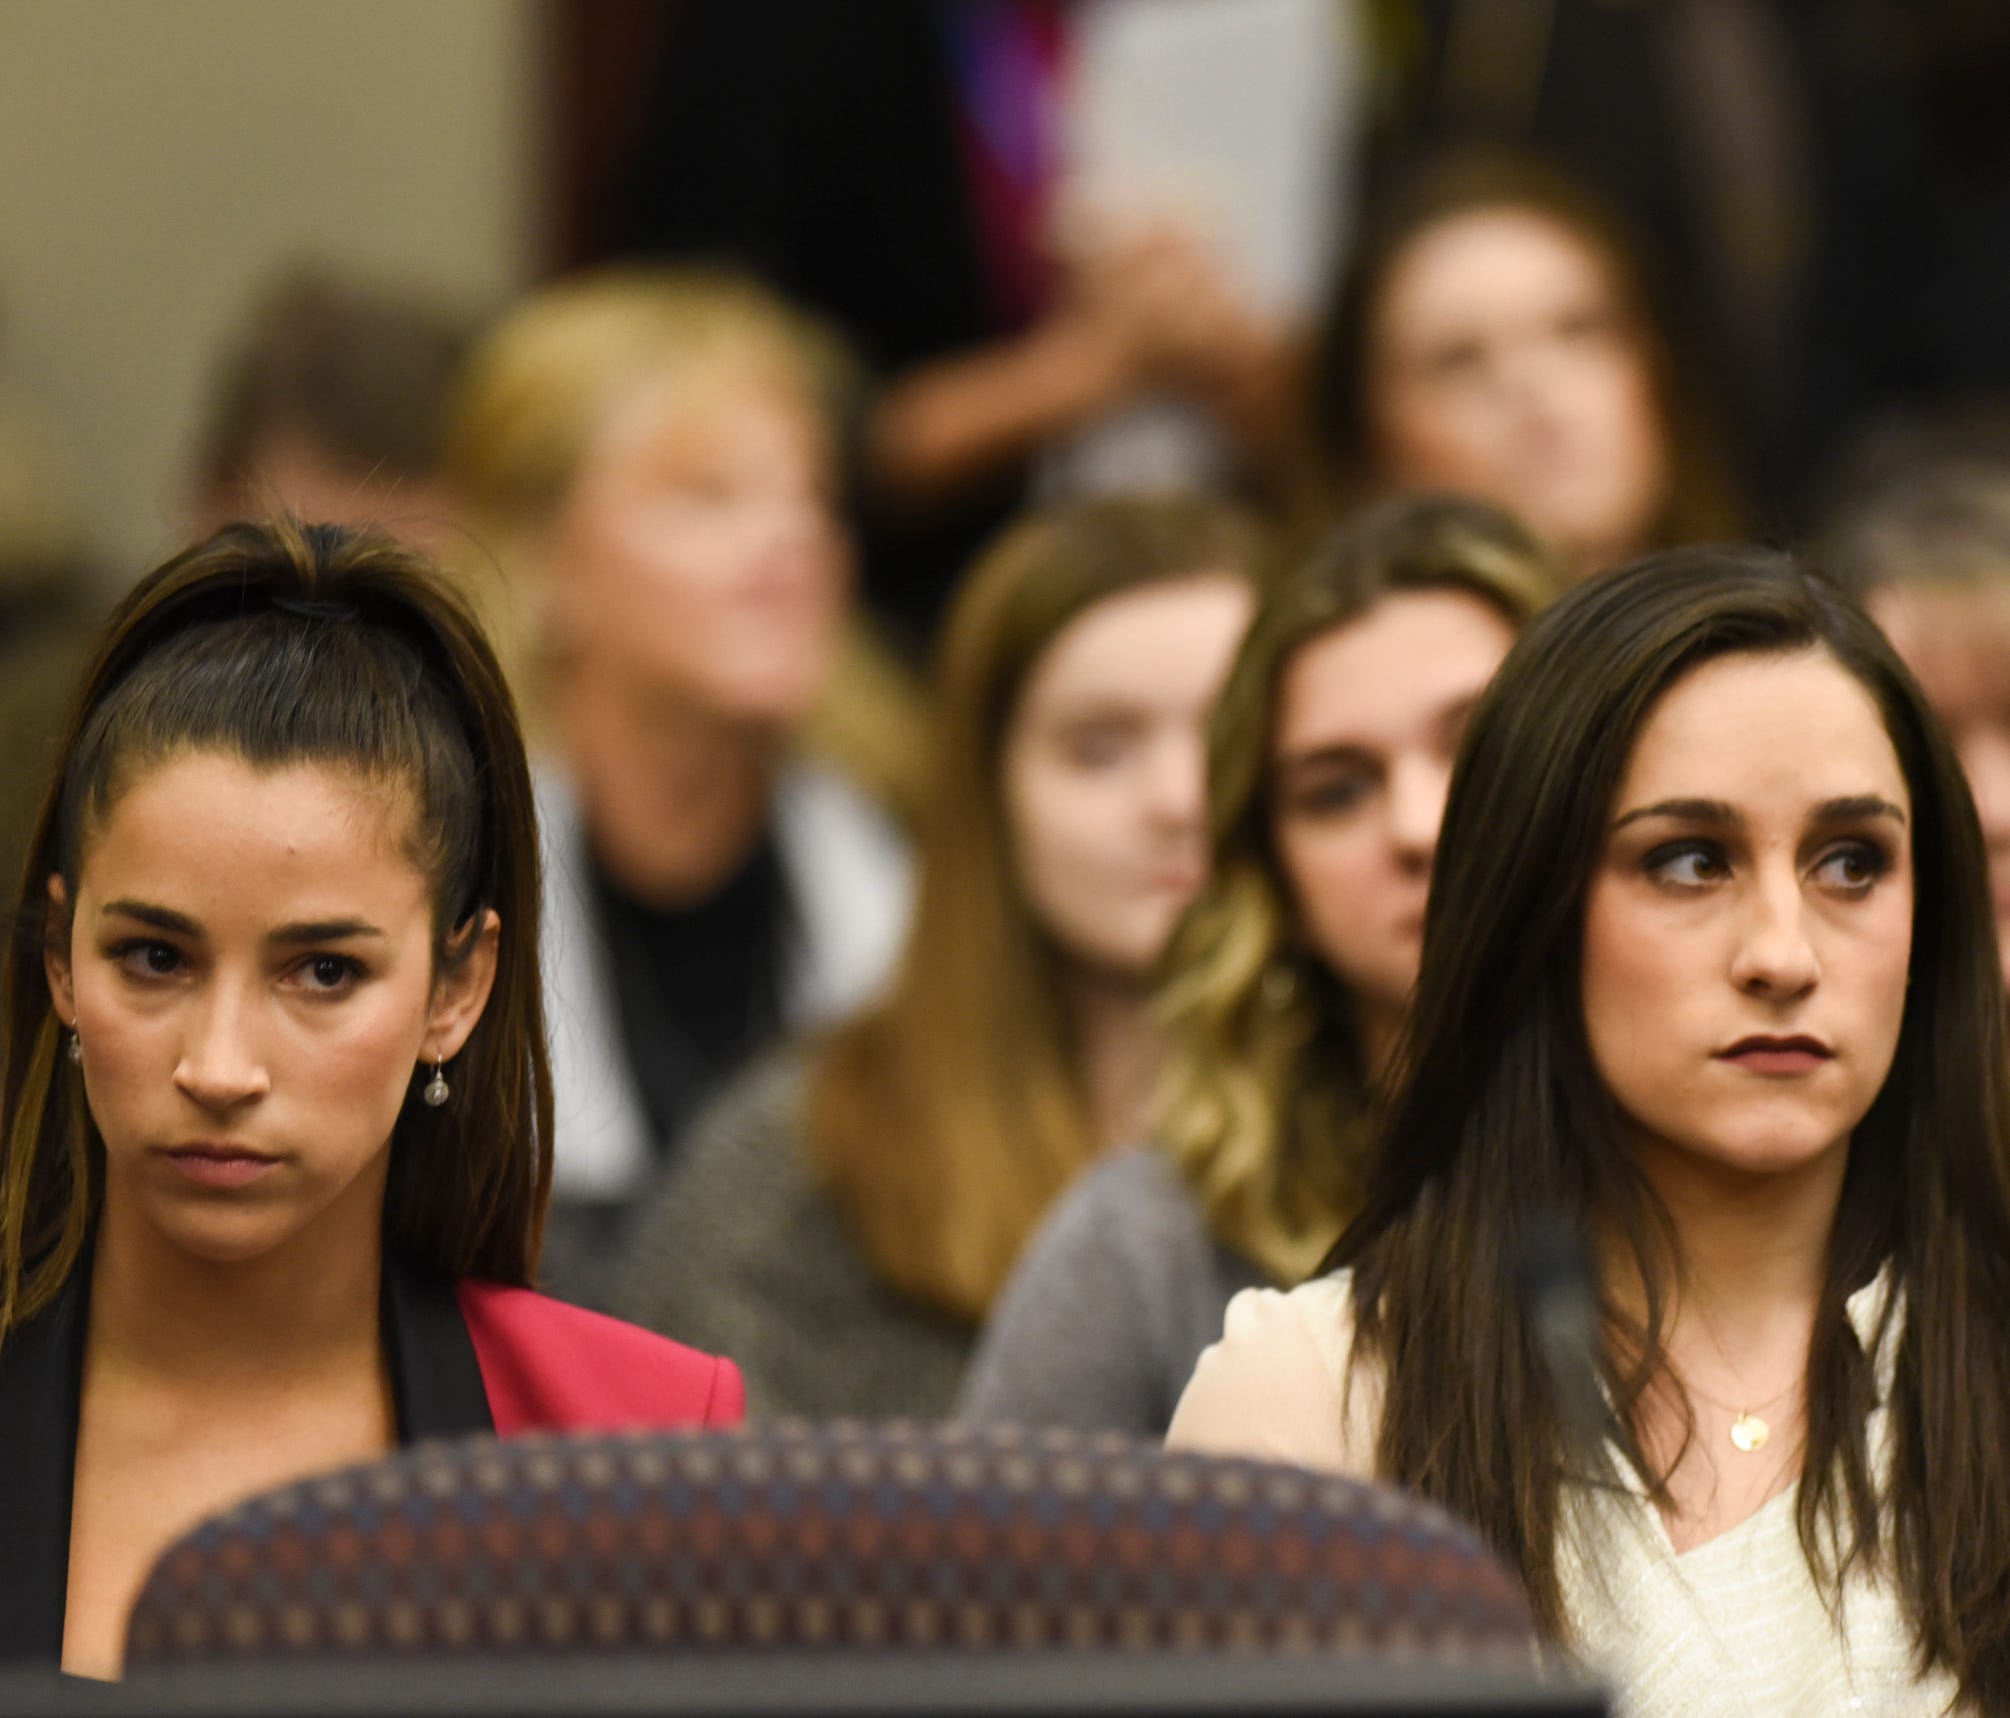 Olympic gold medalists Aly Raisman, left, and Jordyn Wieber sit in Circuit Judge Rosemarie Aquilina's courtroom Friday, Jan. 19, 2018, during the fourth day the sentencing hearing for former sports medicine doctor Larry Nassar, who pleaded guilty to 